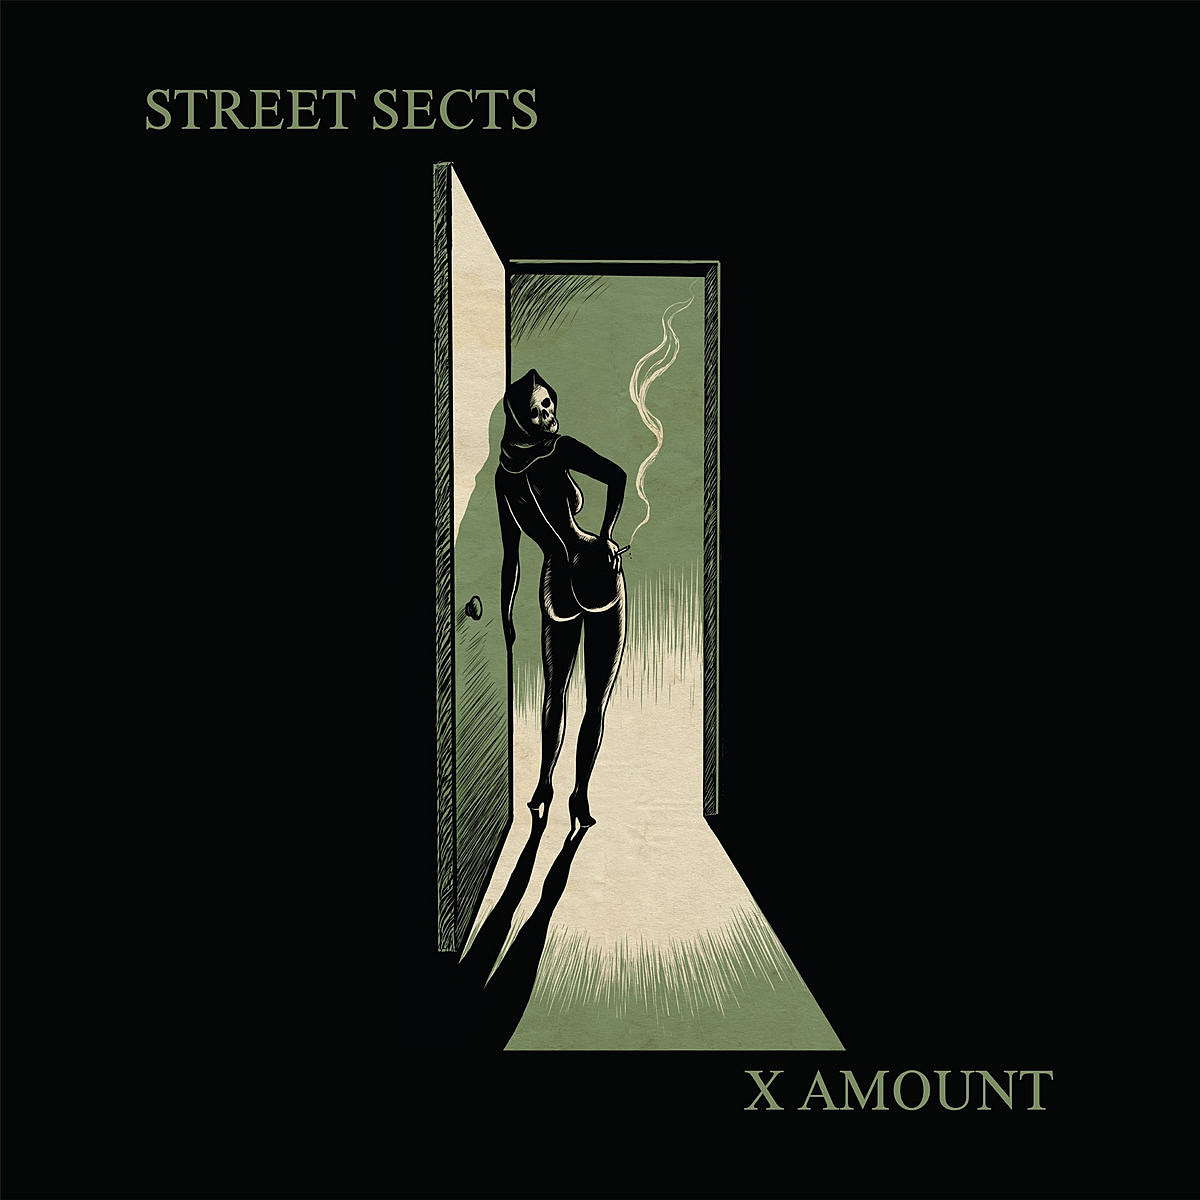 Street Sects - X Amount